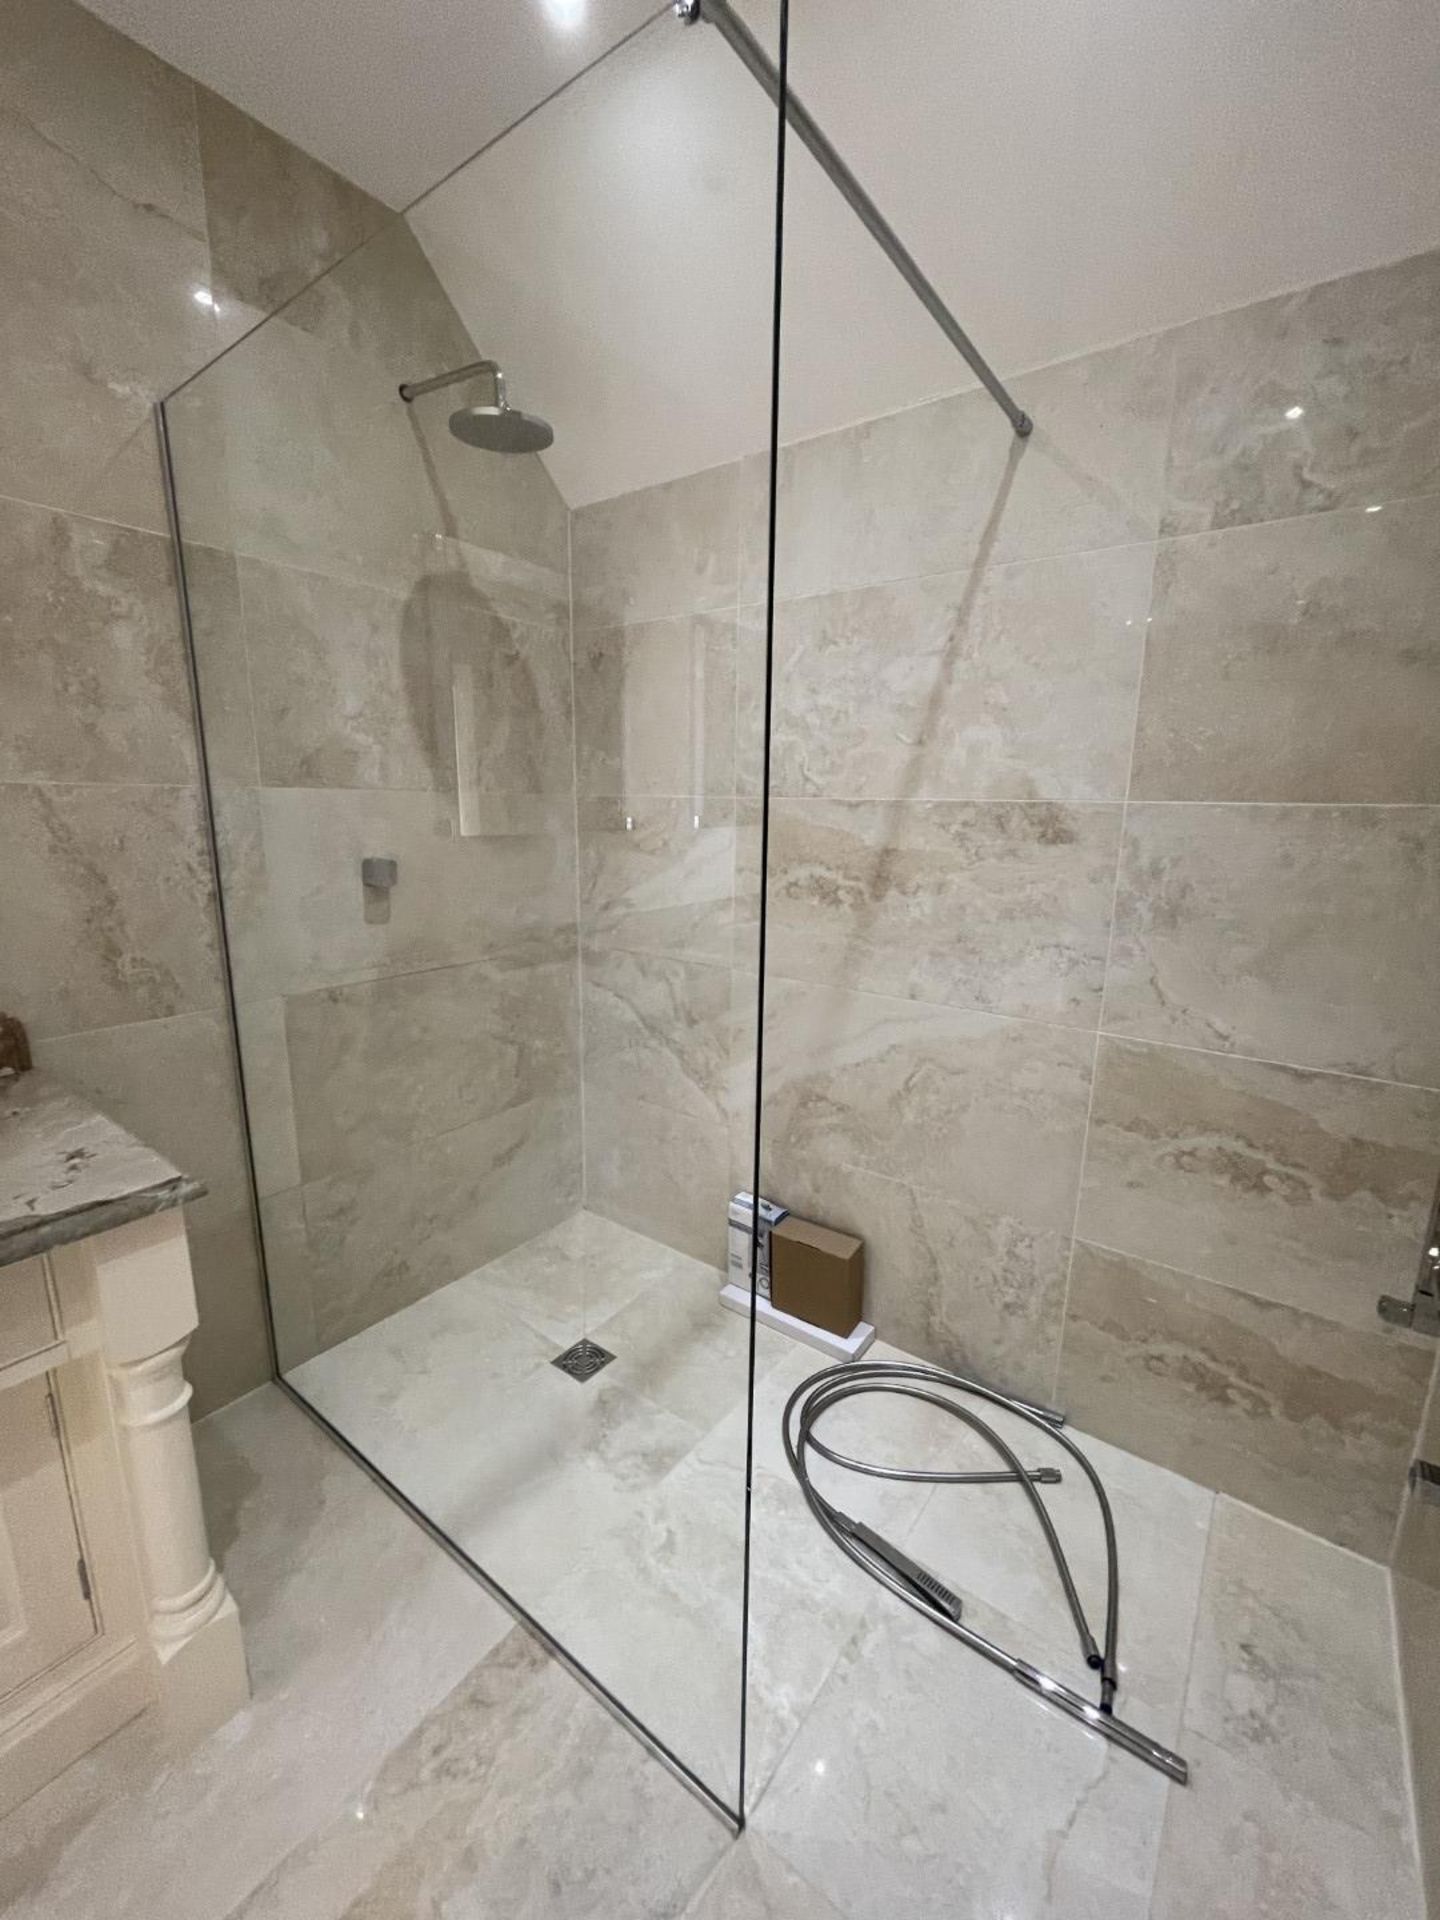 1 x Premium Shower and Enclosure + Hansgrove Controls and Thermostat - Ref: PAN232 - CL896 - NO - Image 7 of 21